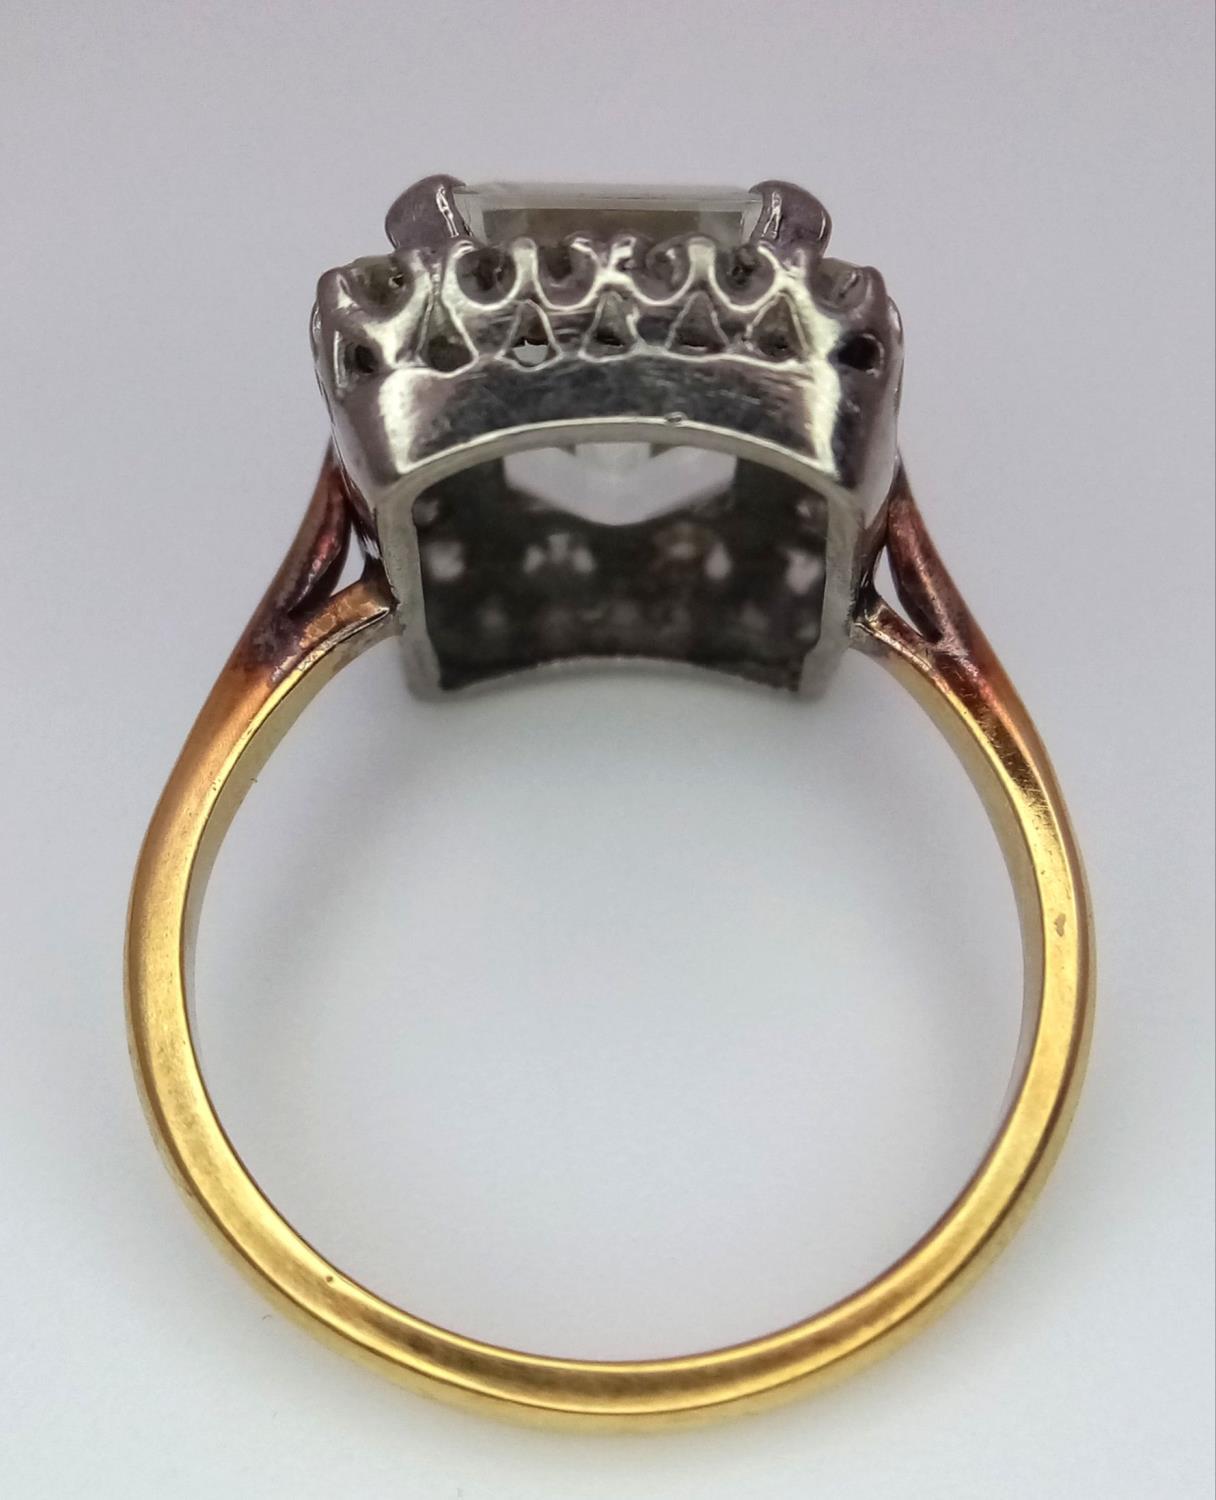 A 16ct Yellow Gold (tested as) Quartz and Diamond Ring, 0.20ct diamond, 10mmx7mm quartz, size J1/ - Image 4 of 5